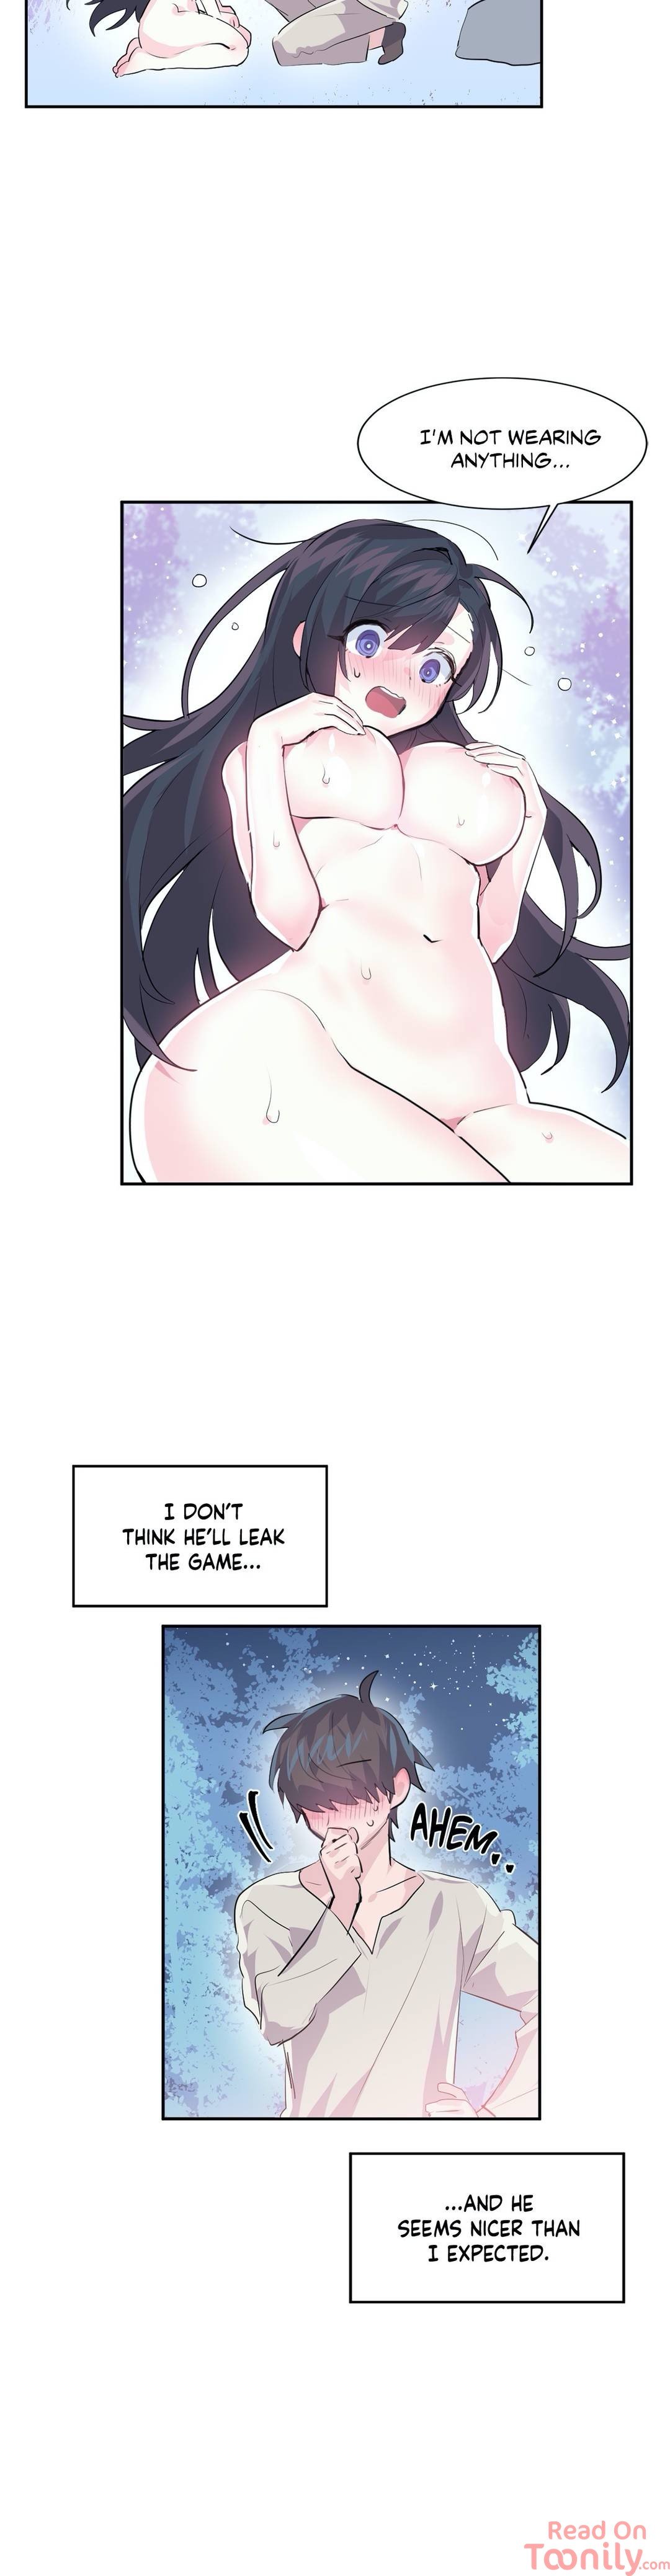 log-in-to-lust-a-land-chap-3-23